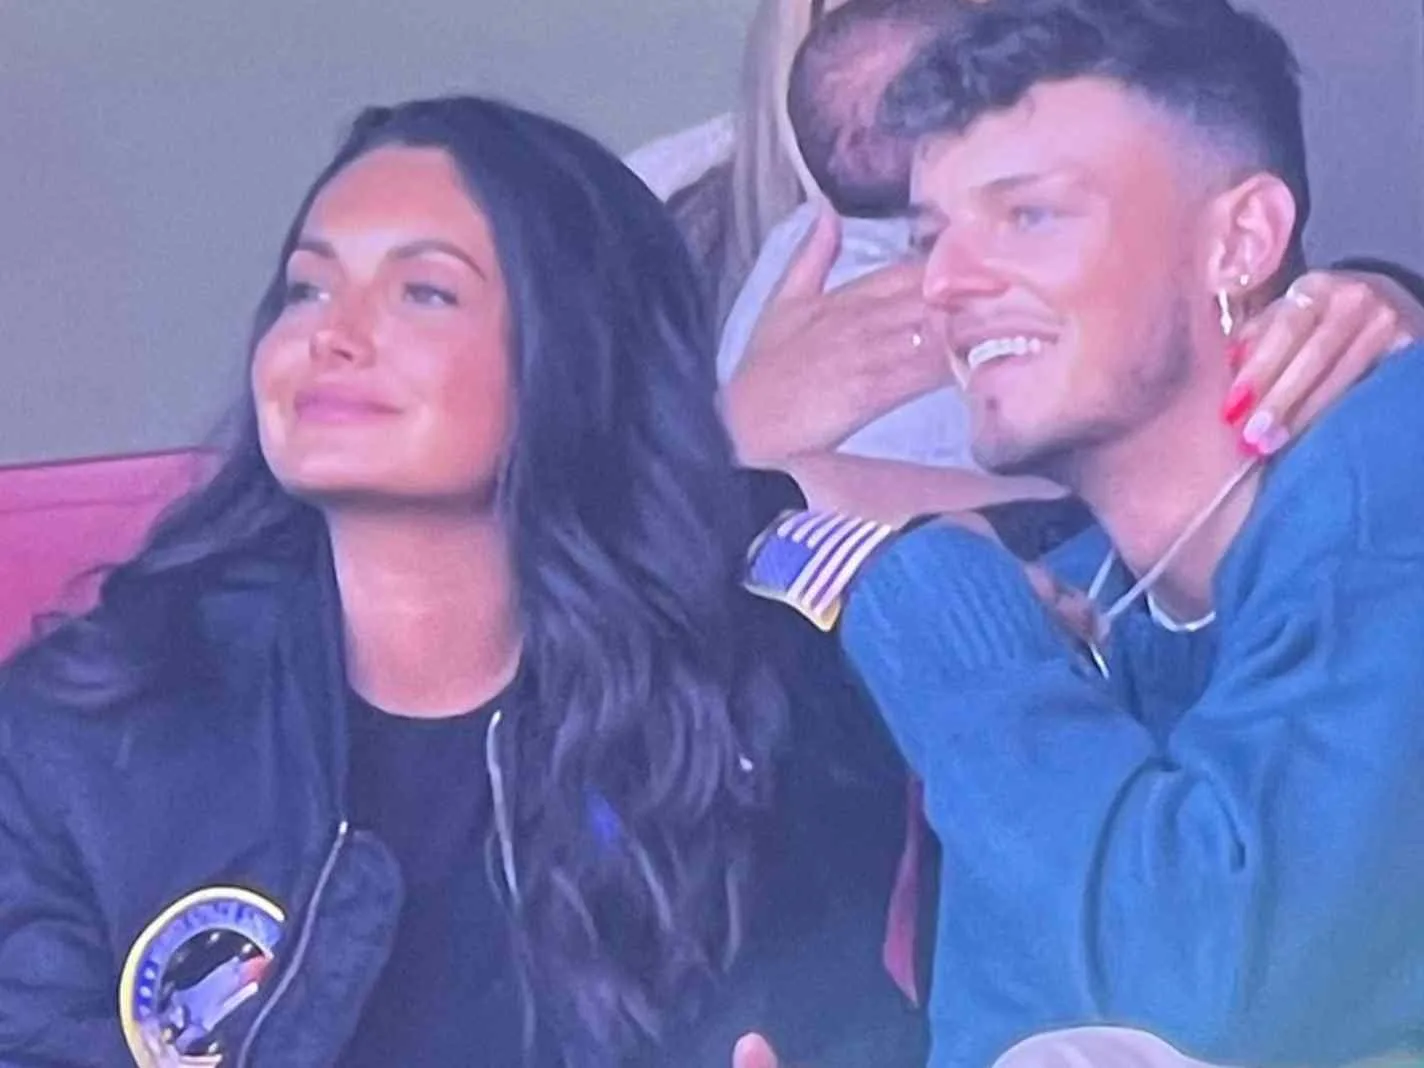 The photo shows Ben White watching Arsenal's game against Leeds United alongside his girlfriend Milly Adams.